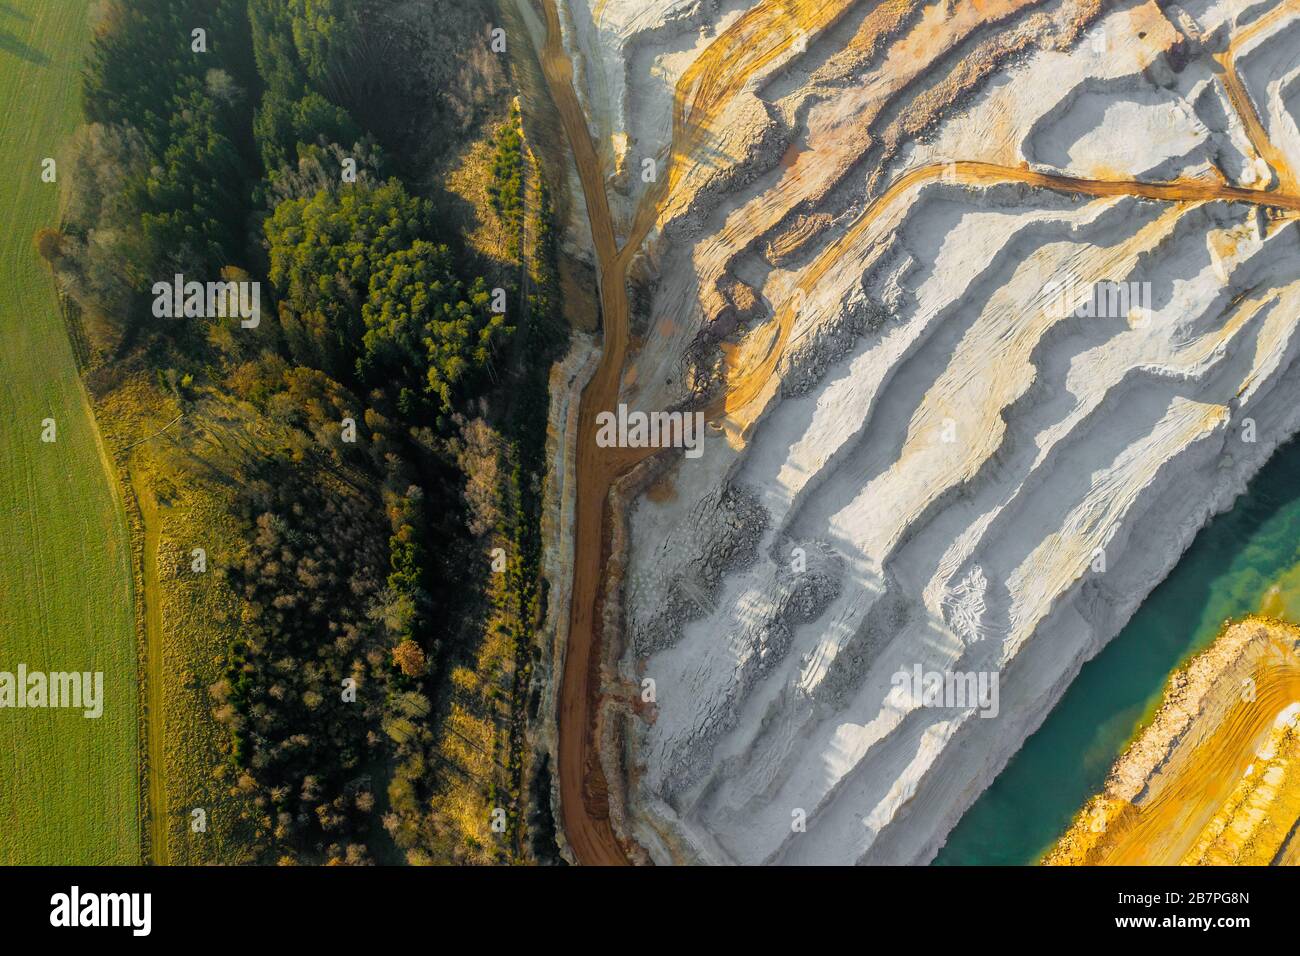 Top view on a sand quarry along a road. Sandpit is near a forest. Mining of natural resources or ore. Stock Photo